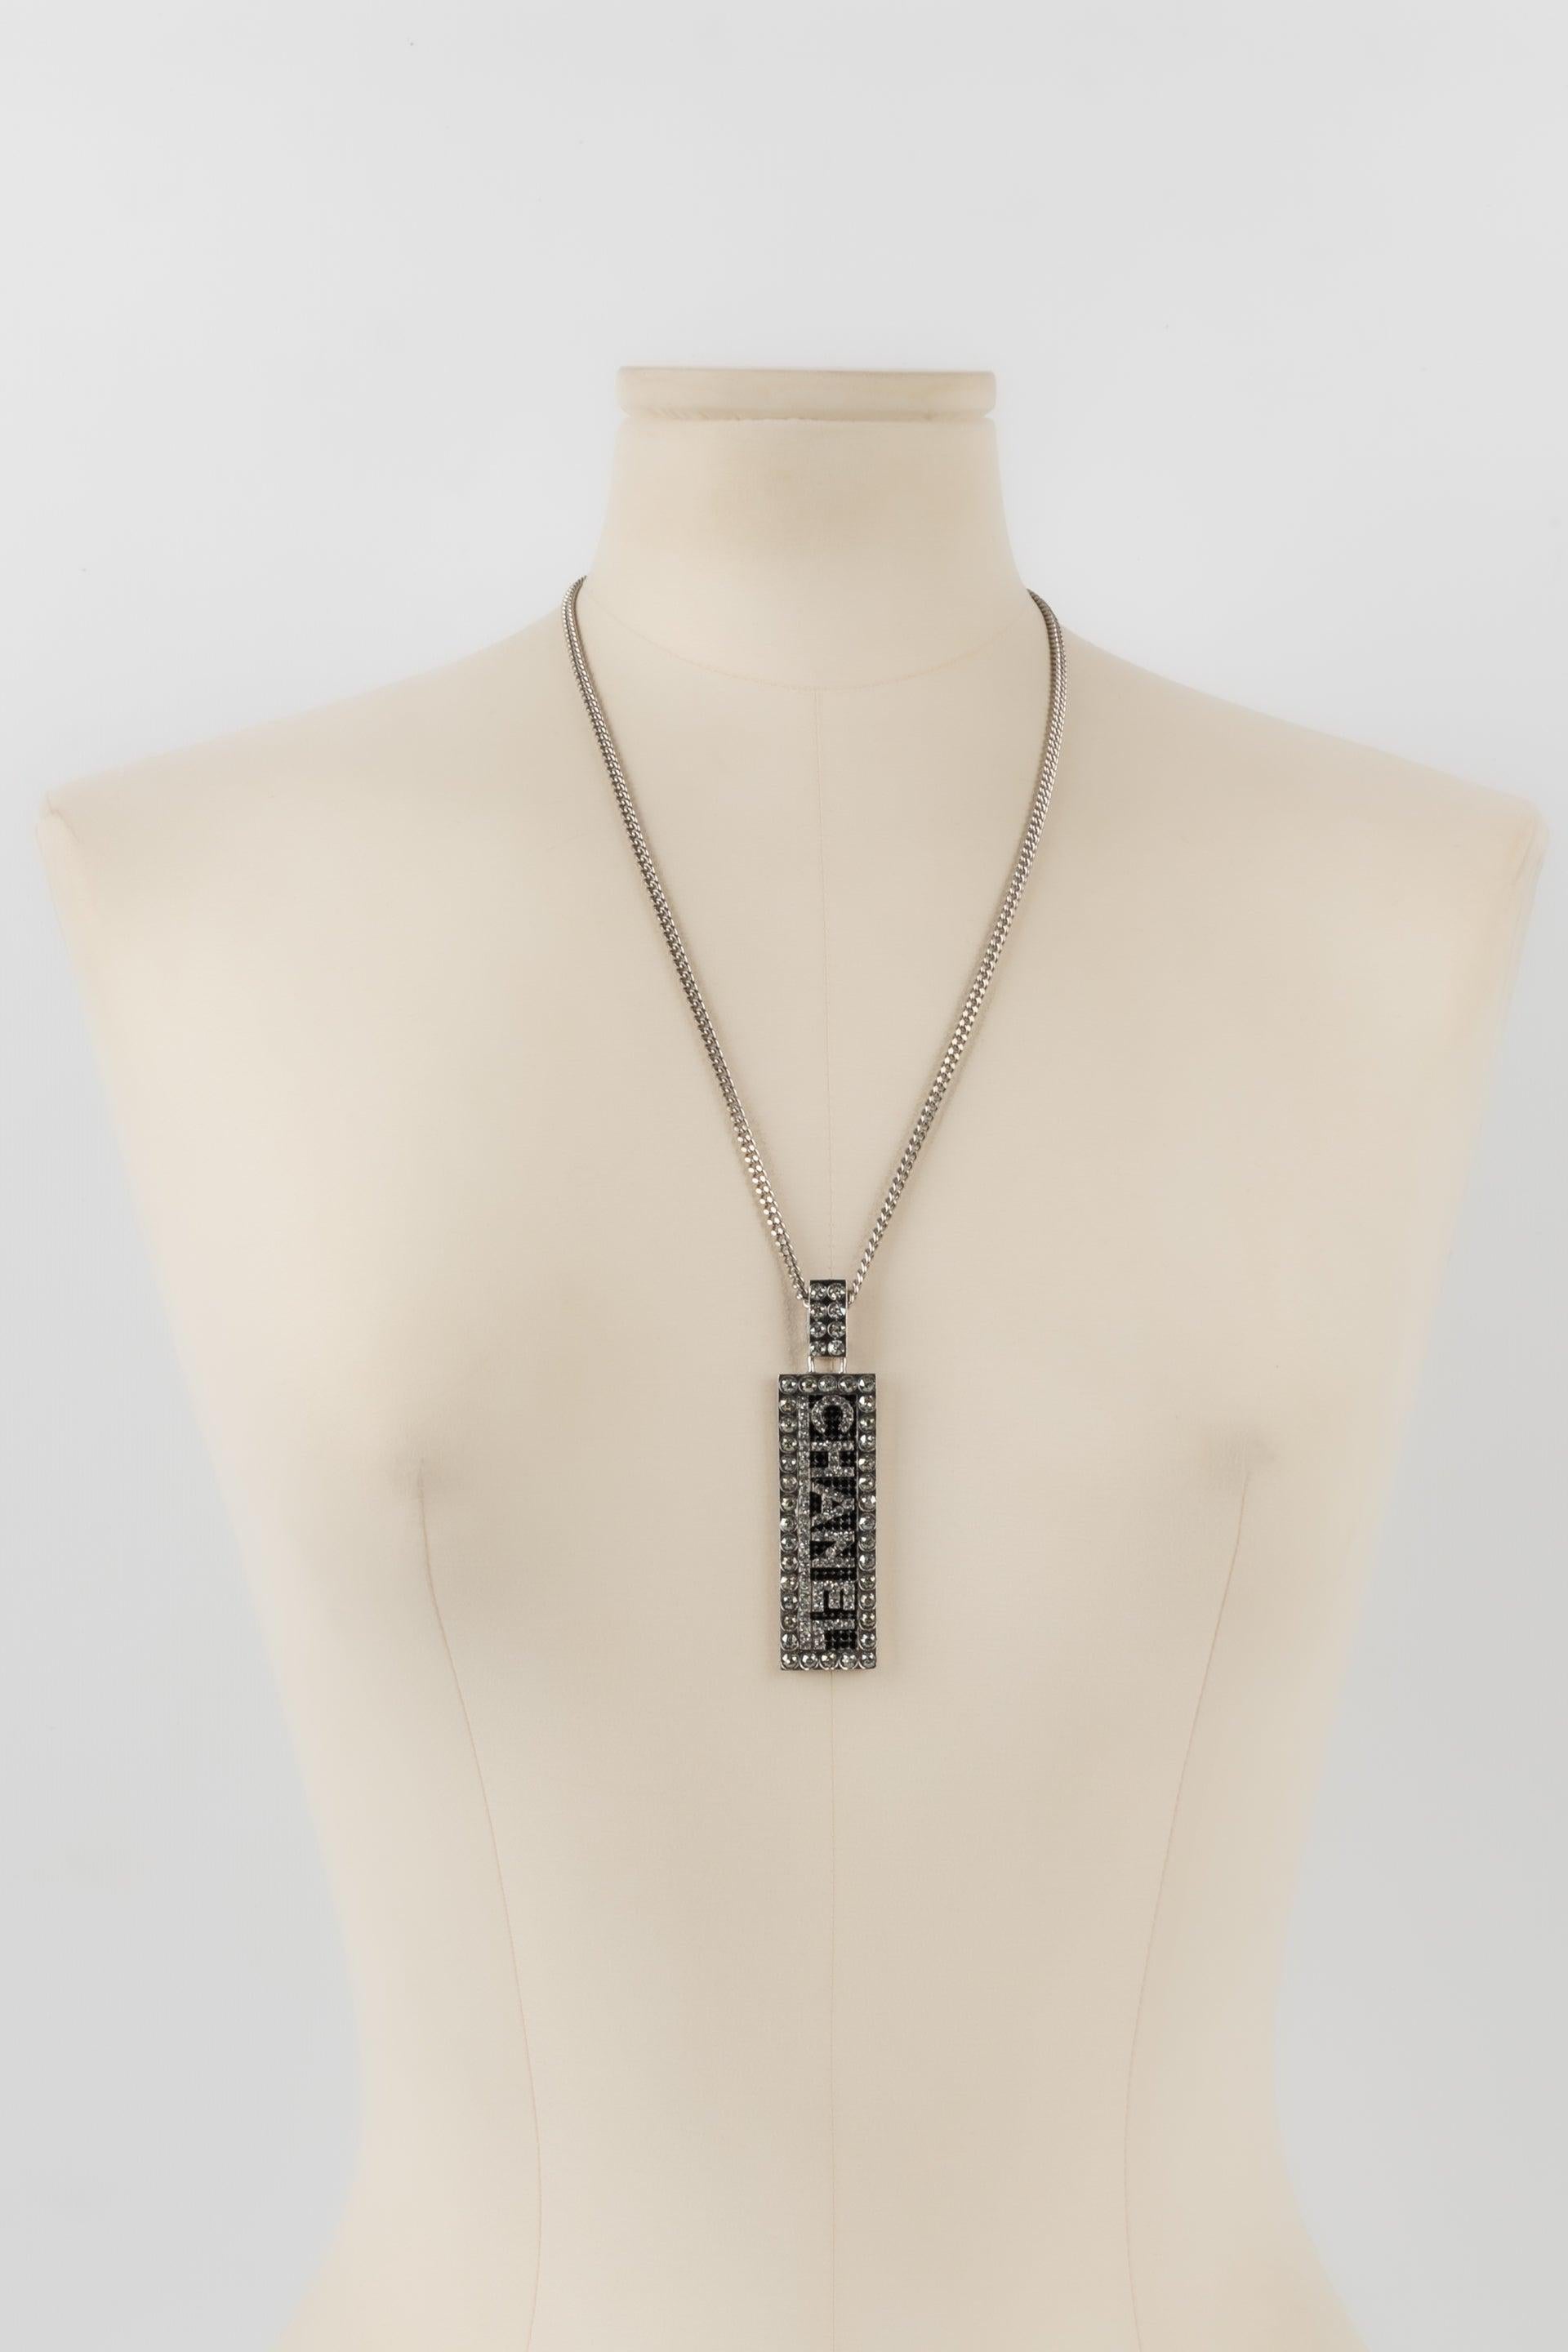 Chanel - (Made in France) Silvery metal necklace with a Swarovski rhinestone pendant. Fall-Winter 2003 Collection.

Additional information:
Condition:Very good condition
Dimensions: Length: 60 cm
Pendant: 8 x 2 cm

Seller Reference: CB216